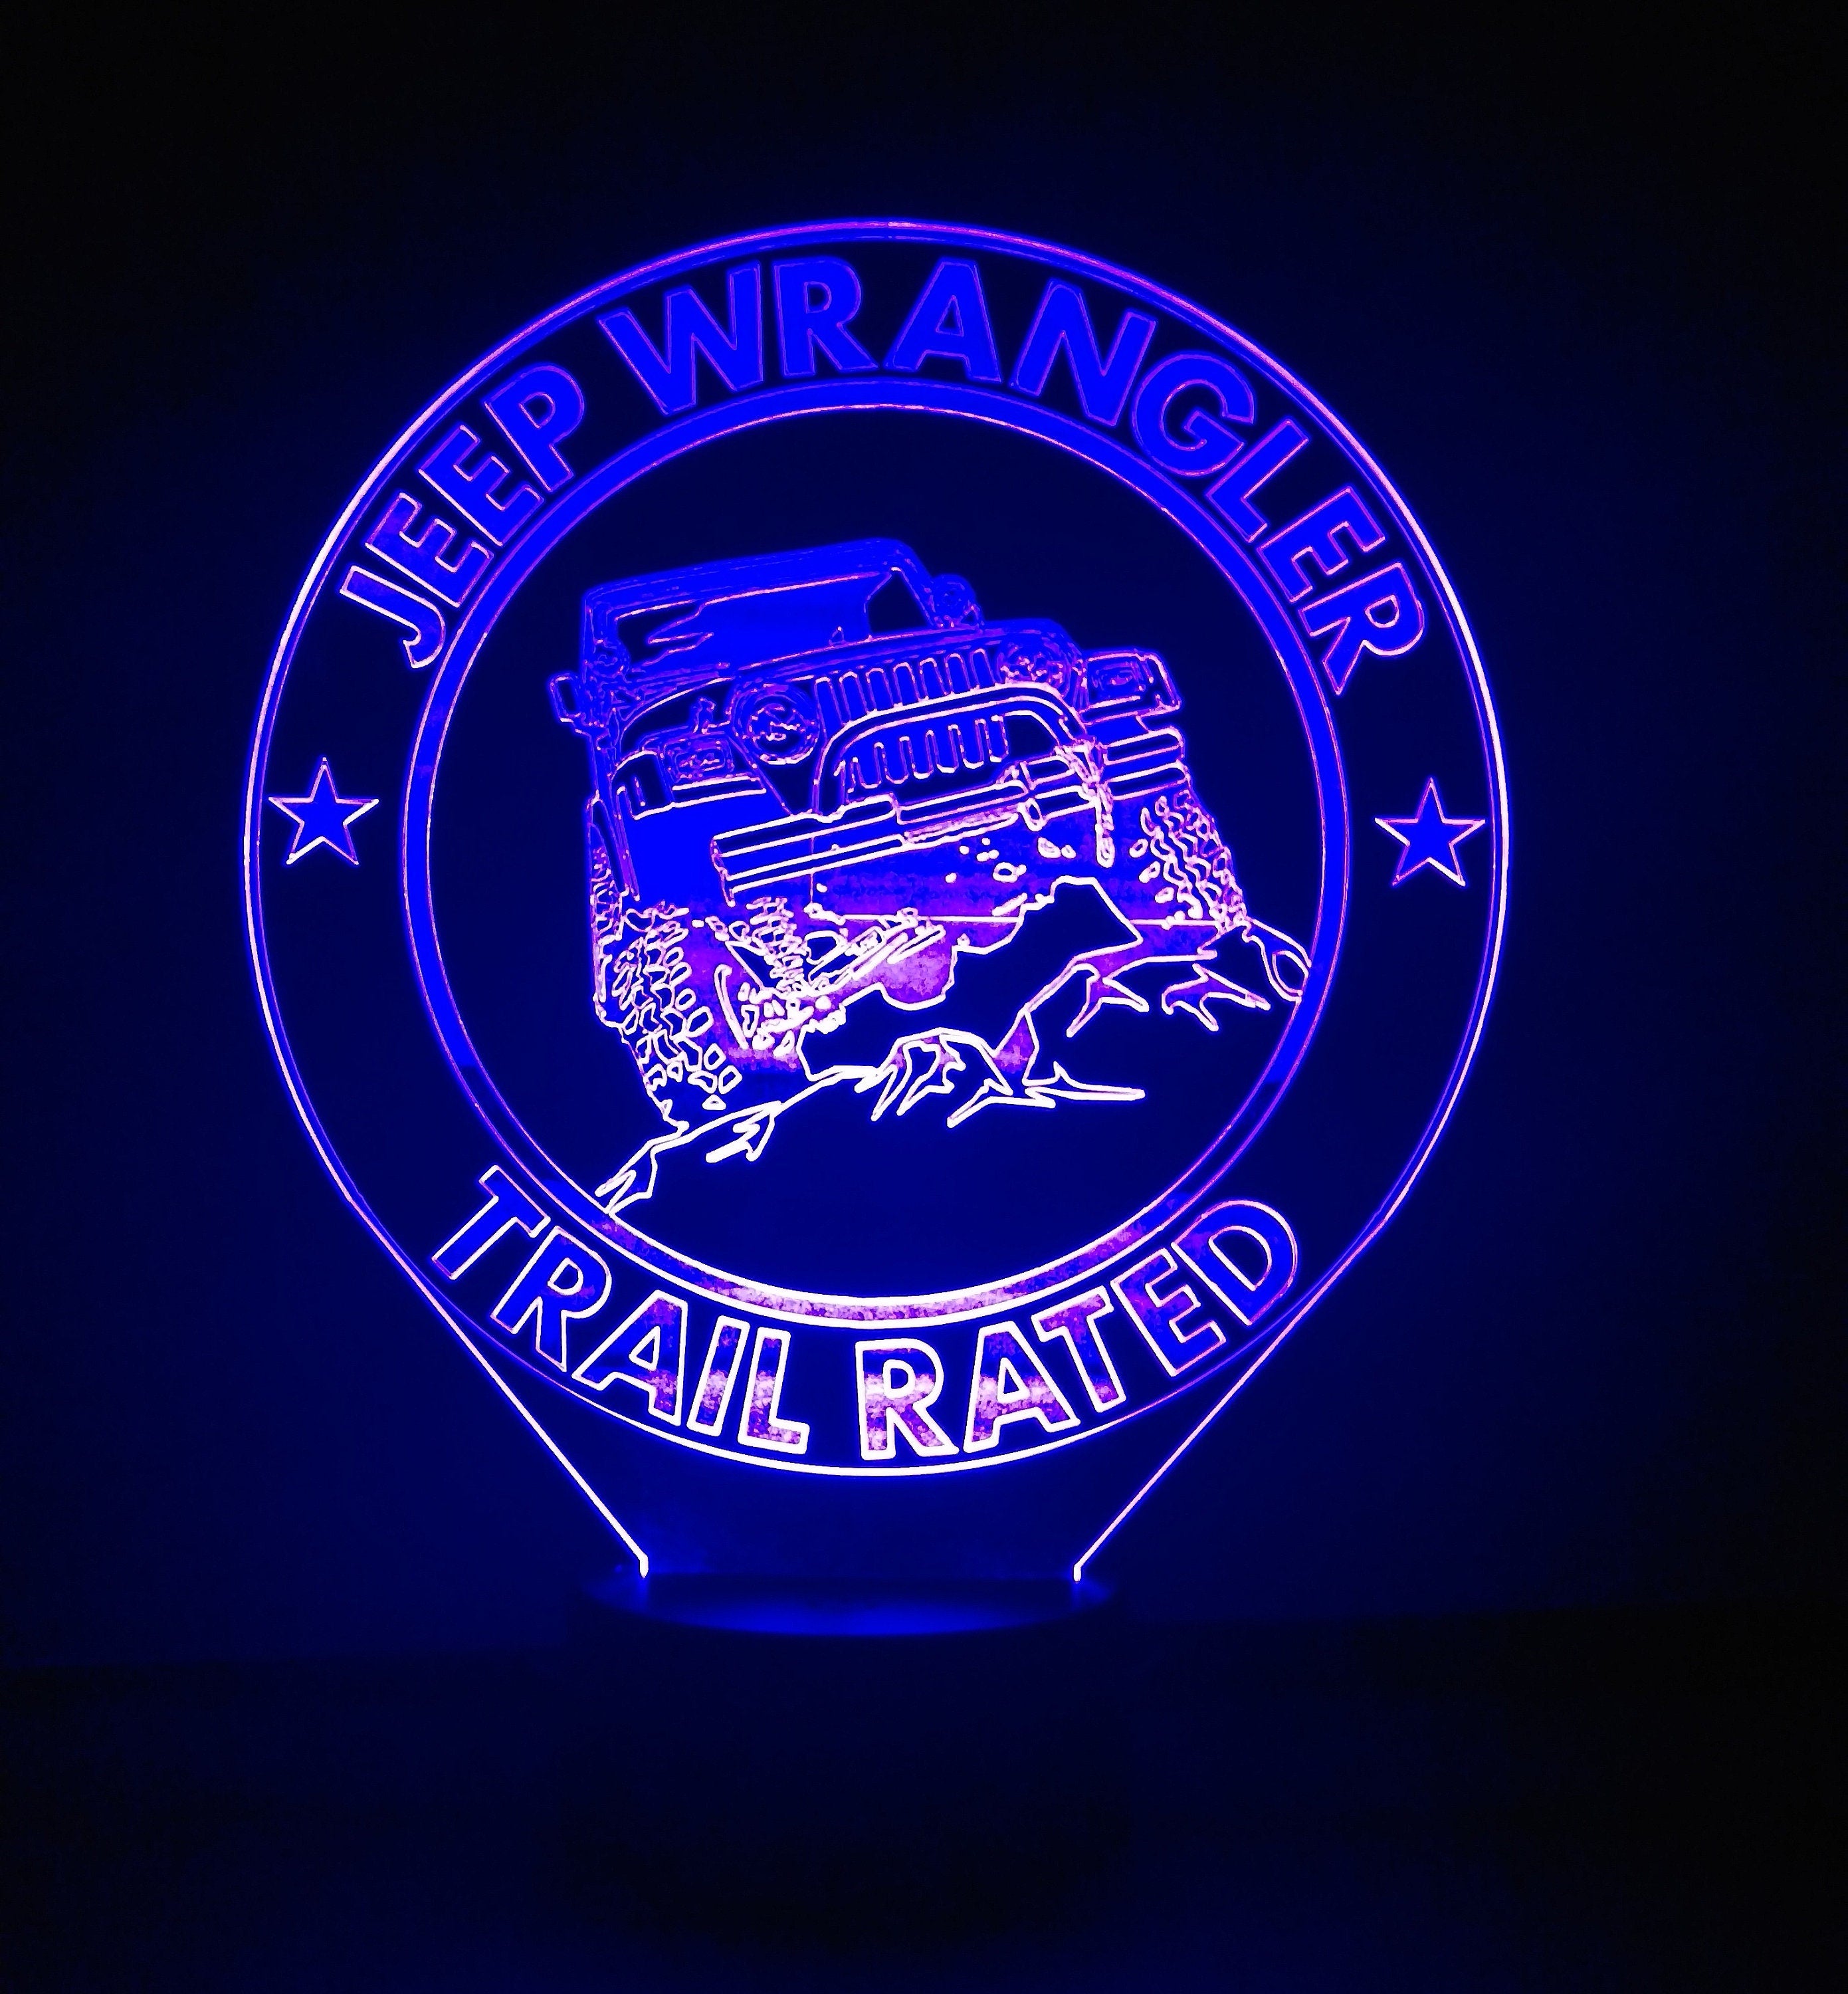 Awesome "Jeep Wrangler - Trail Rated" LED lamp (1106) - FREE SHIPPING!